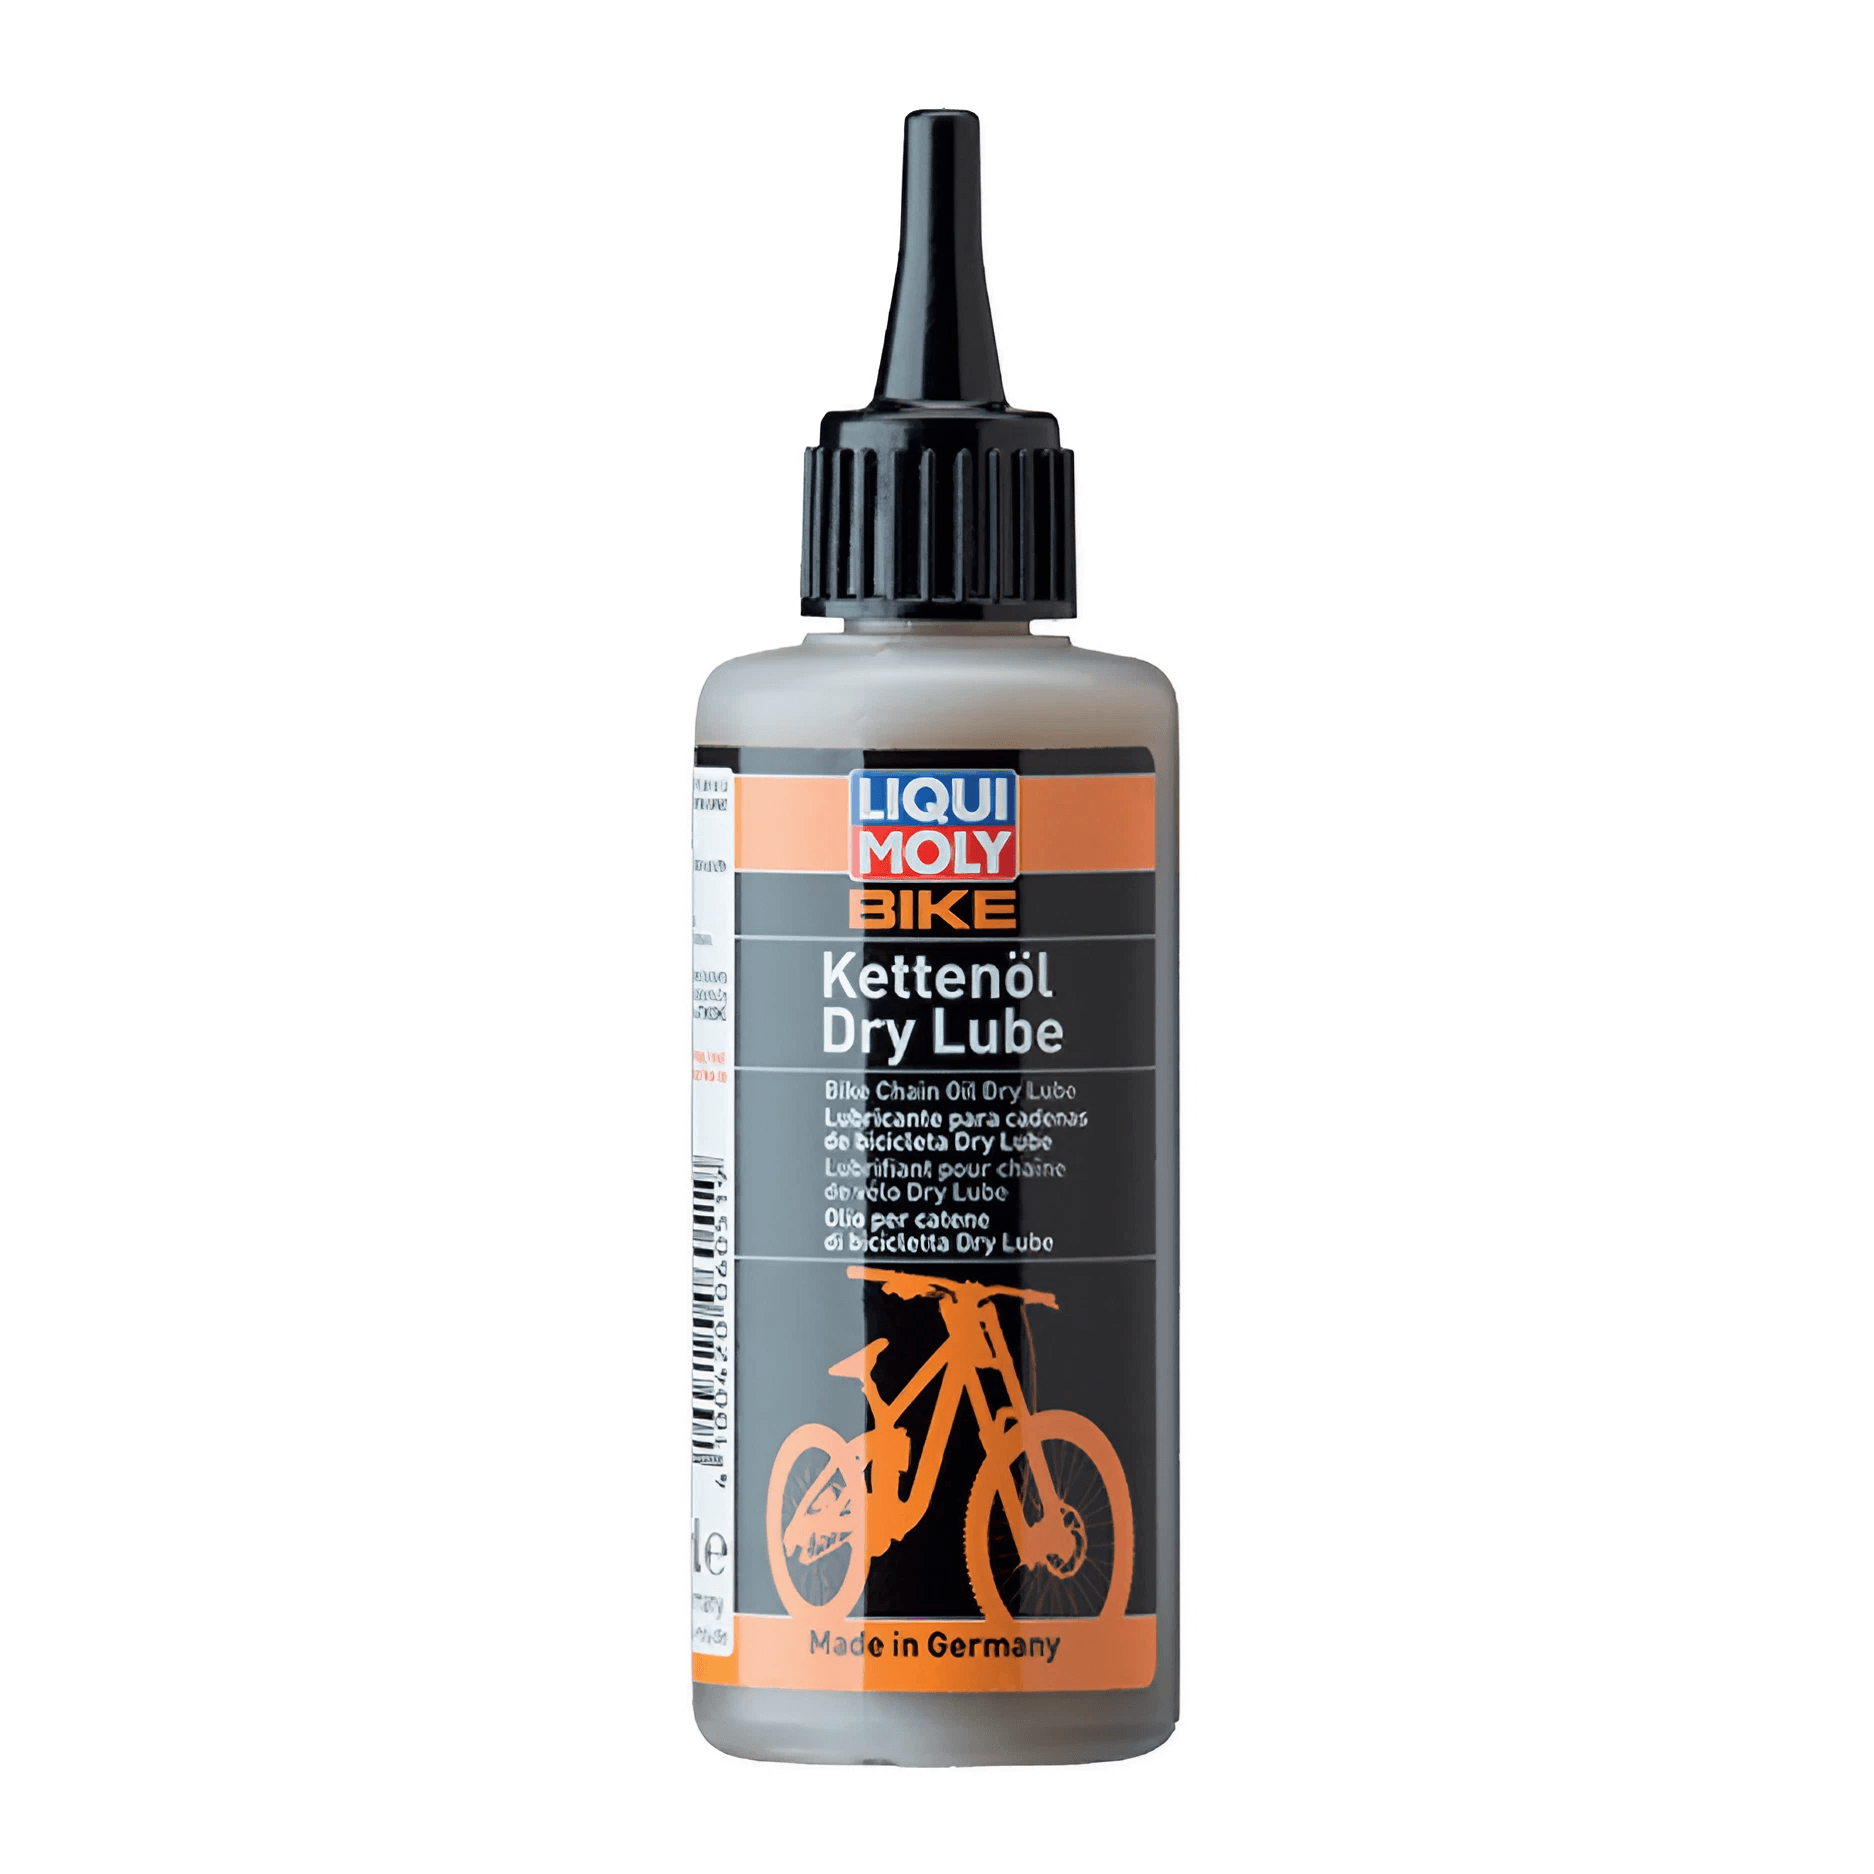 Liqui Moly 6051 Bicycle Chain Dry Lube - High-Performance Lubricant for Smooth Riding